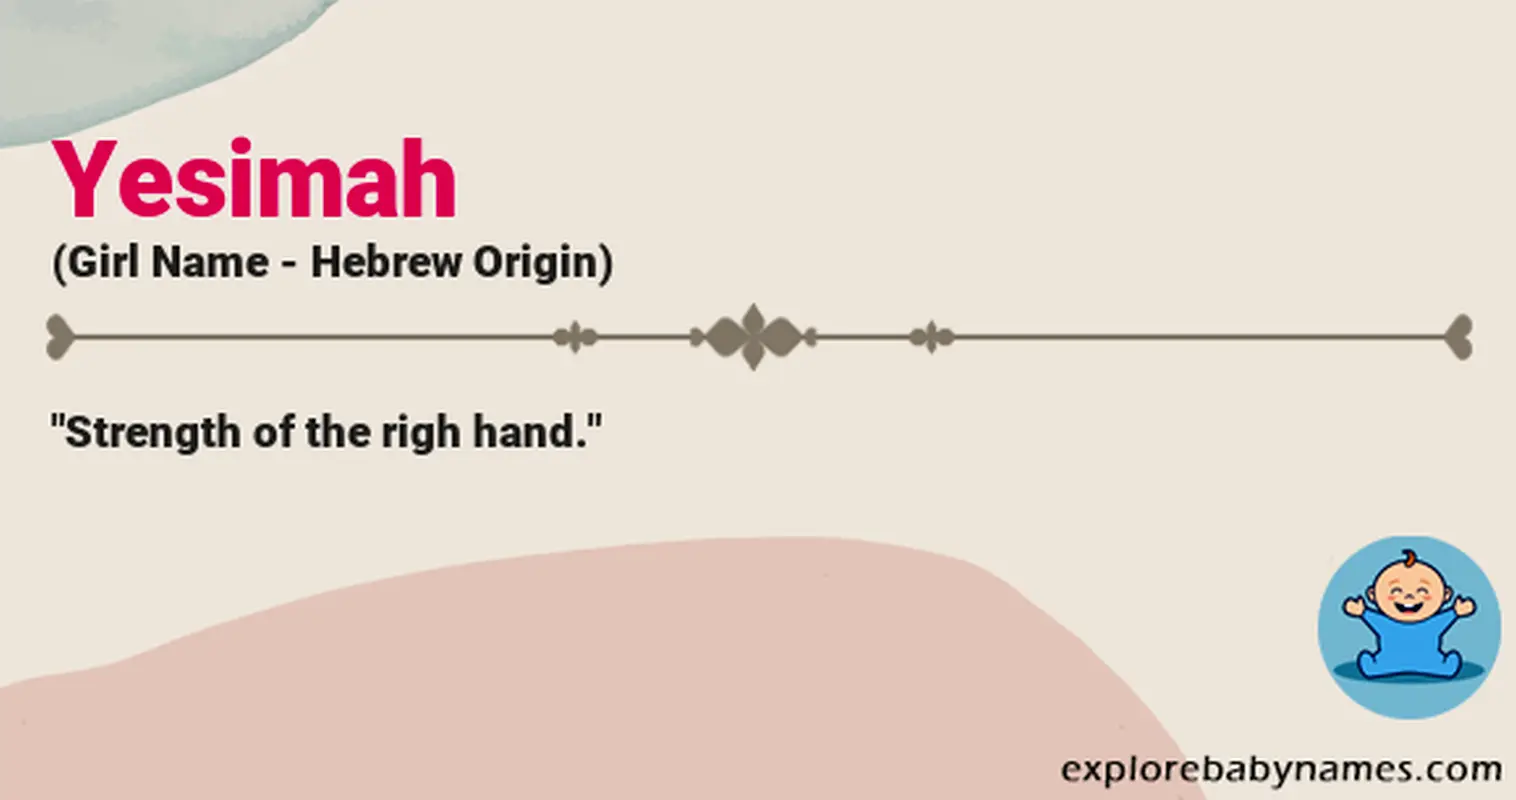 Meaning of Yesimah